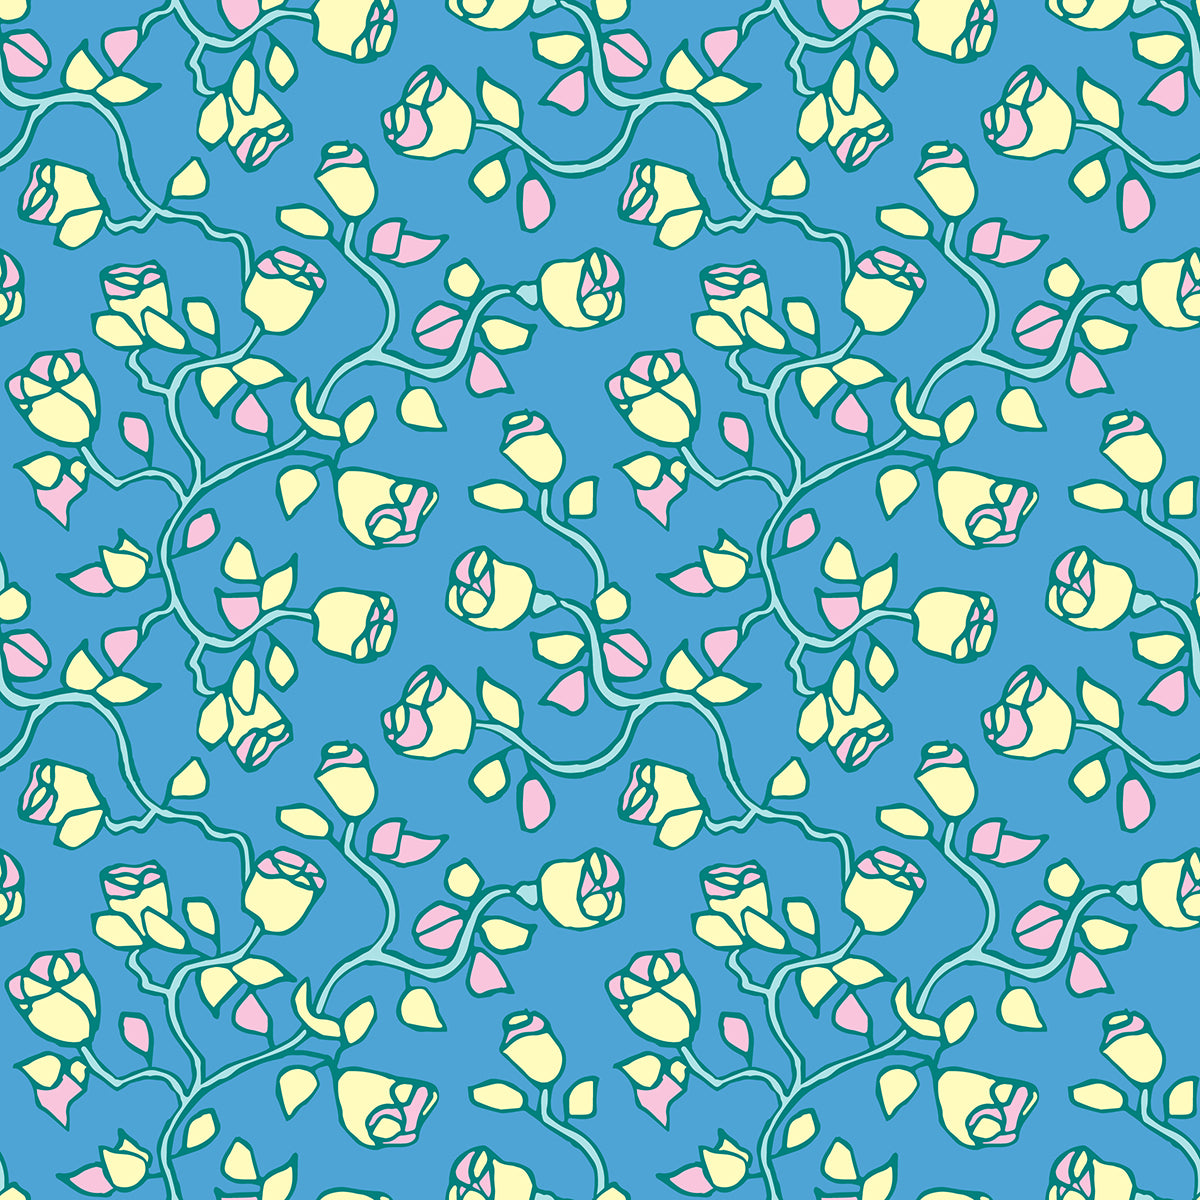 Beach Rose Bloom features a repeating pattern in blue, pink, yellow, and green colors of organic, hand-drawn rose vines.